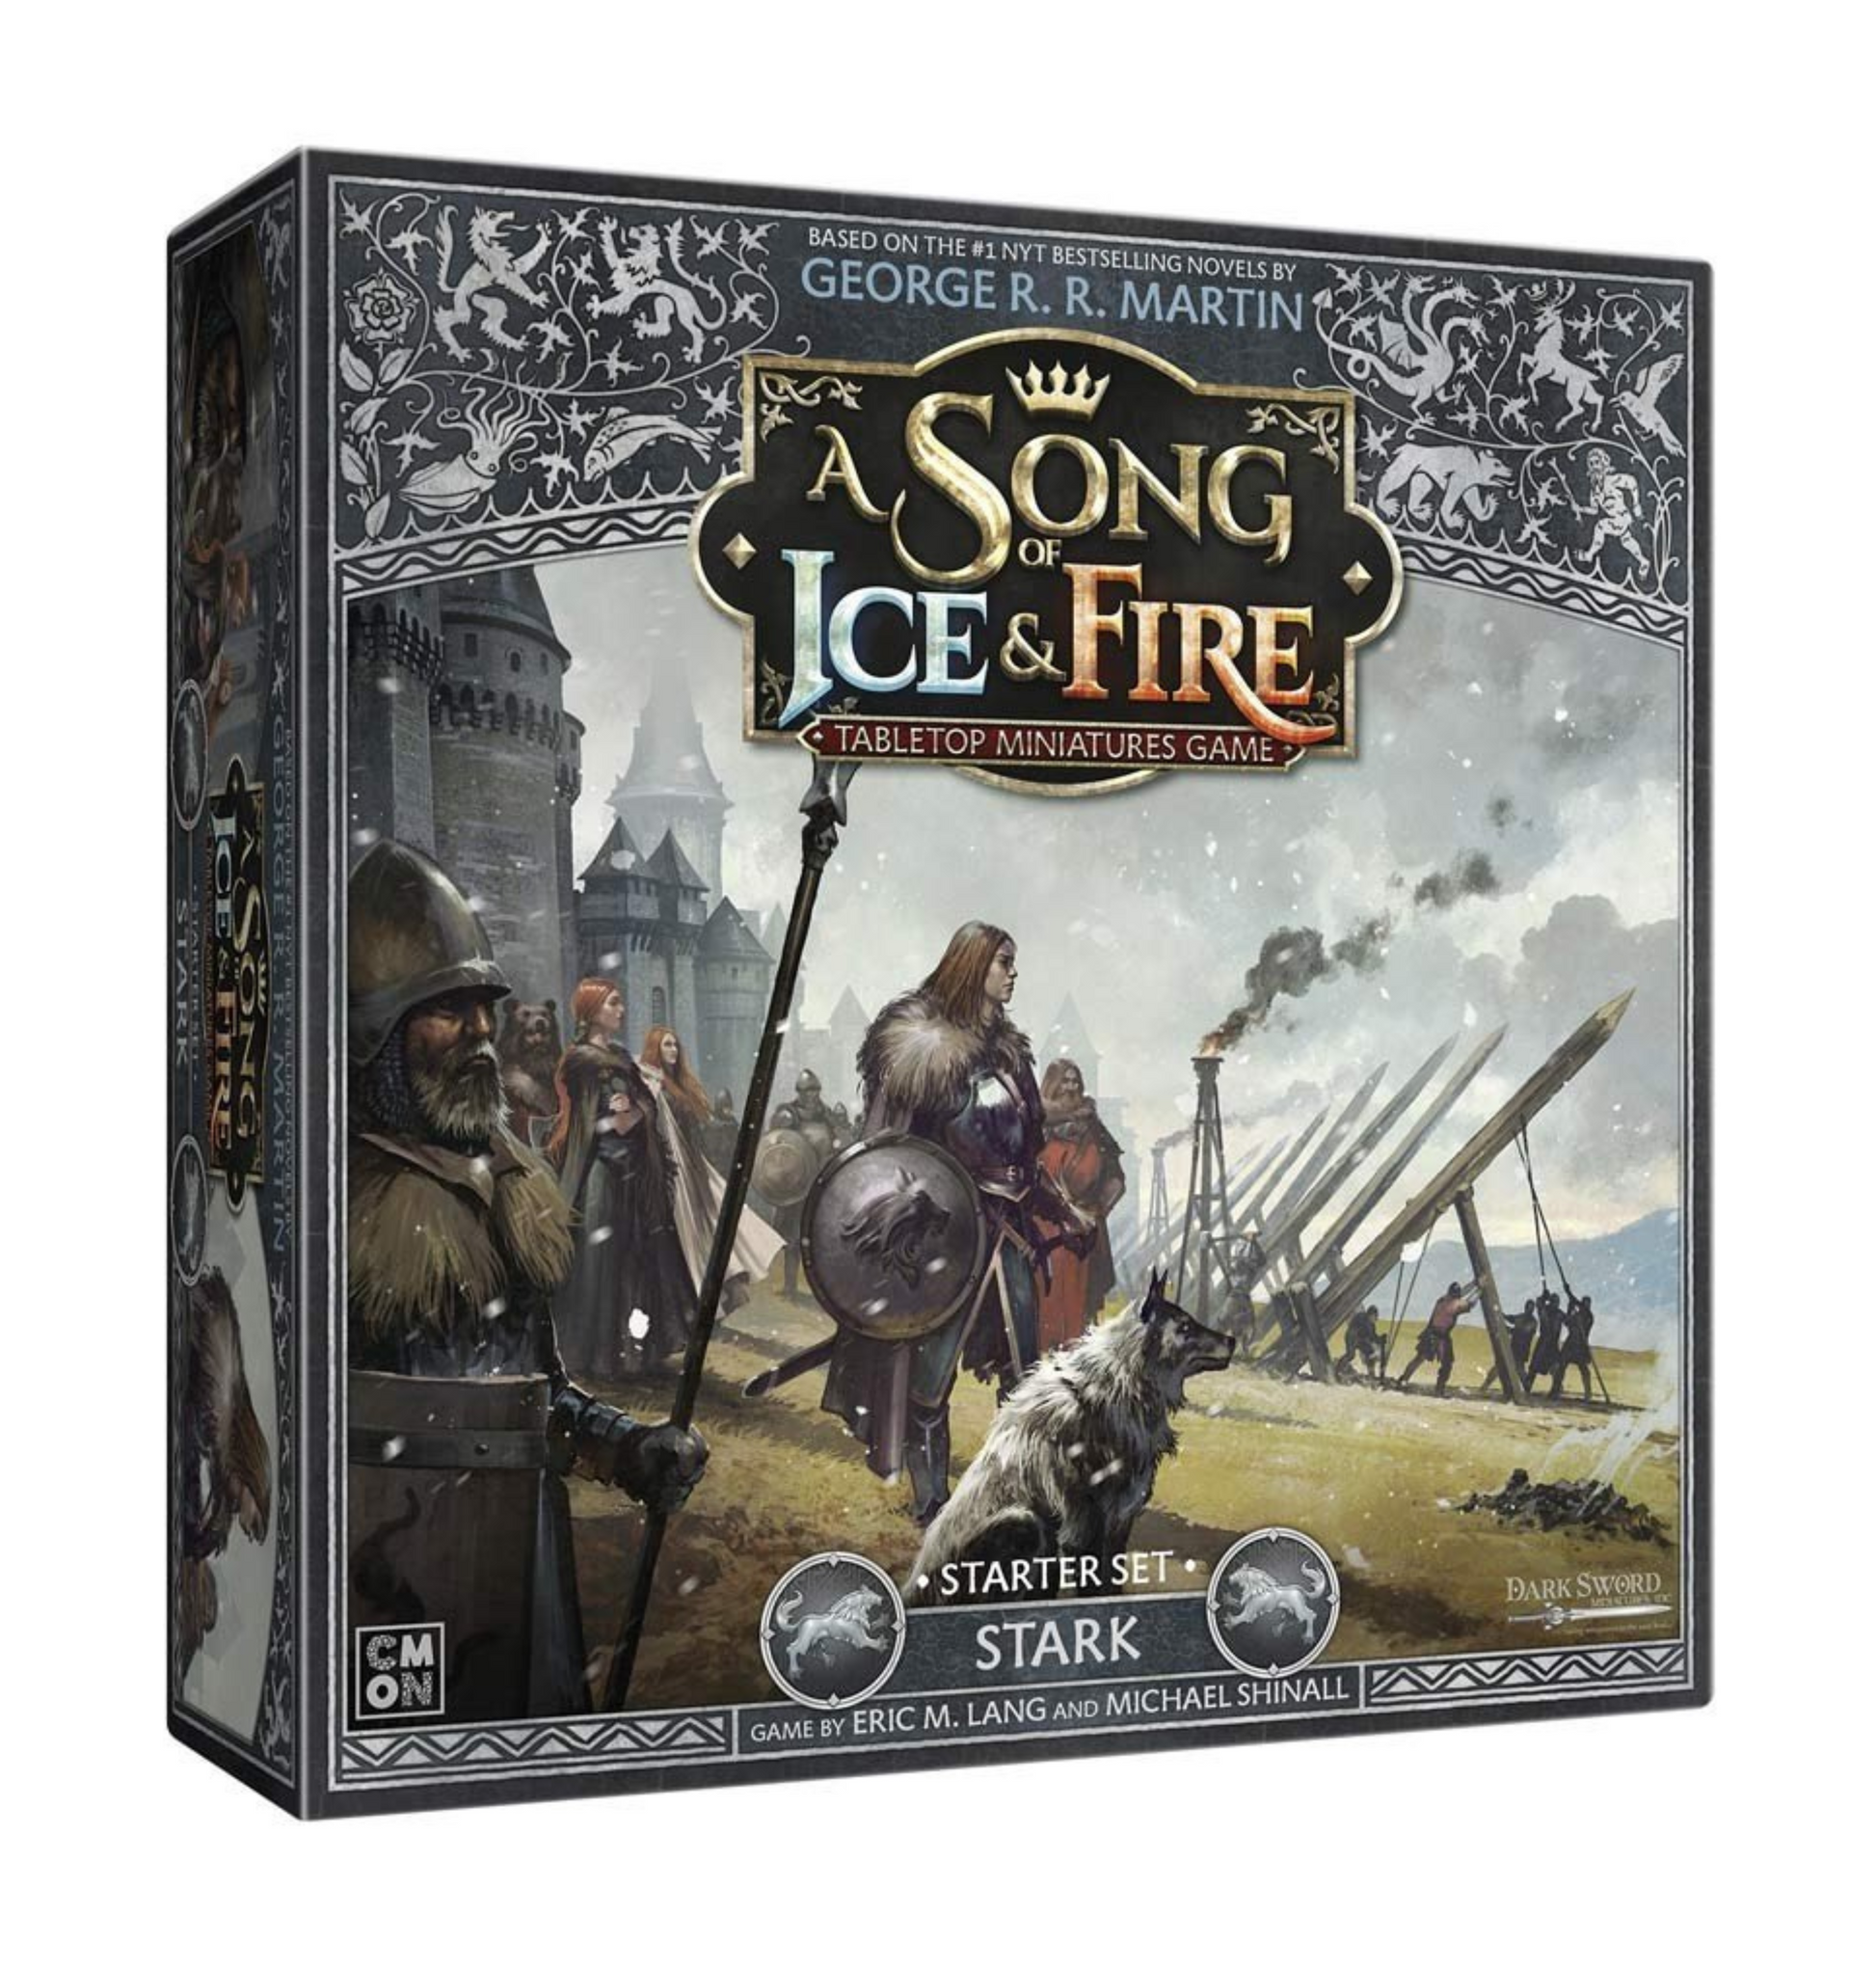 A Song of Ice and Fire - Stark: Starter Set